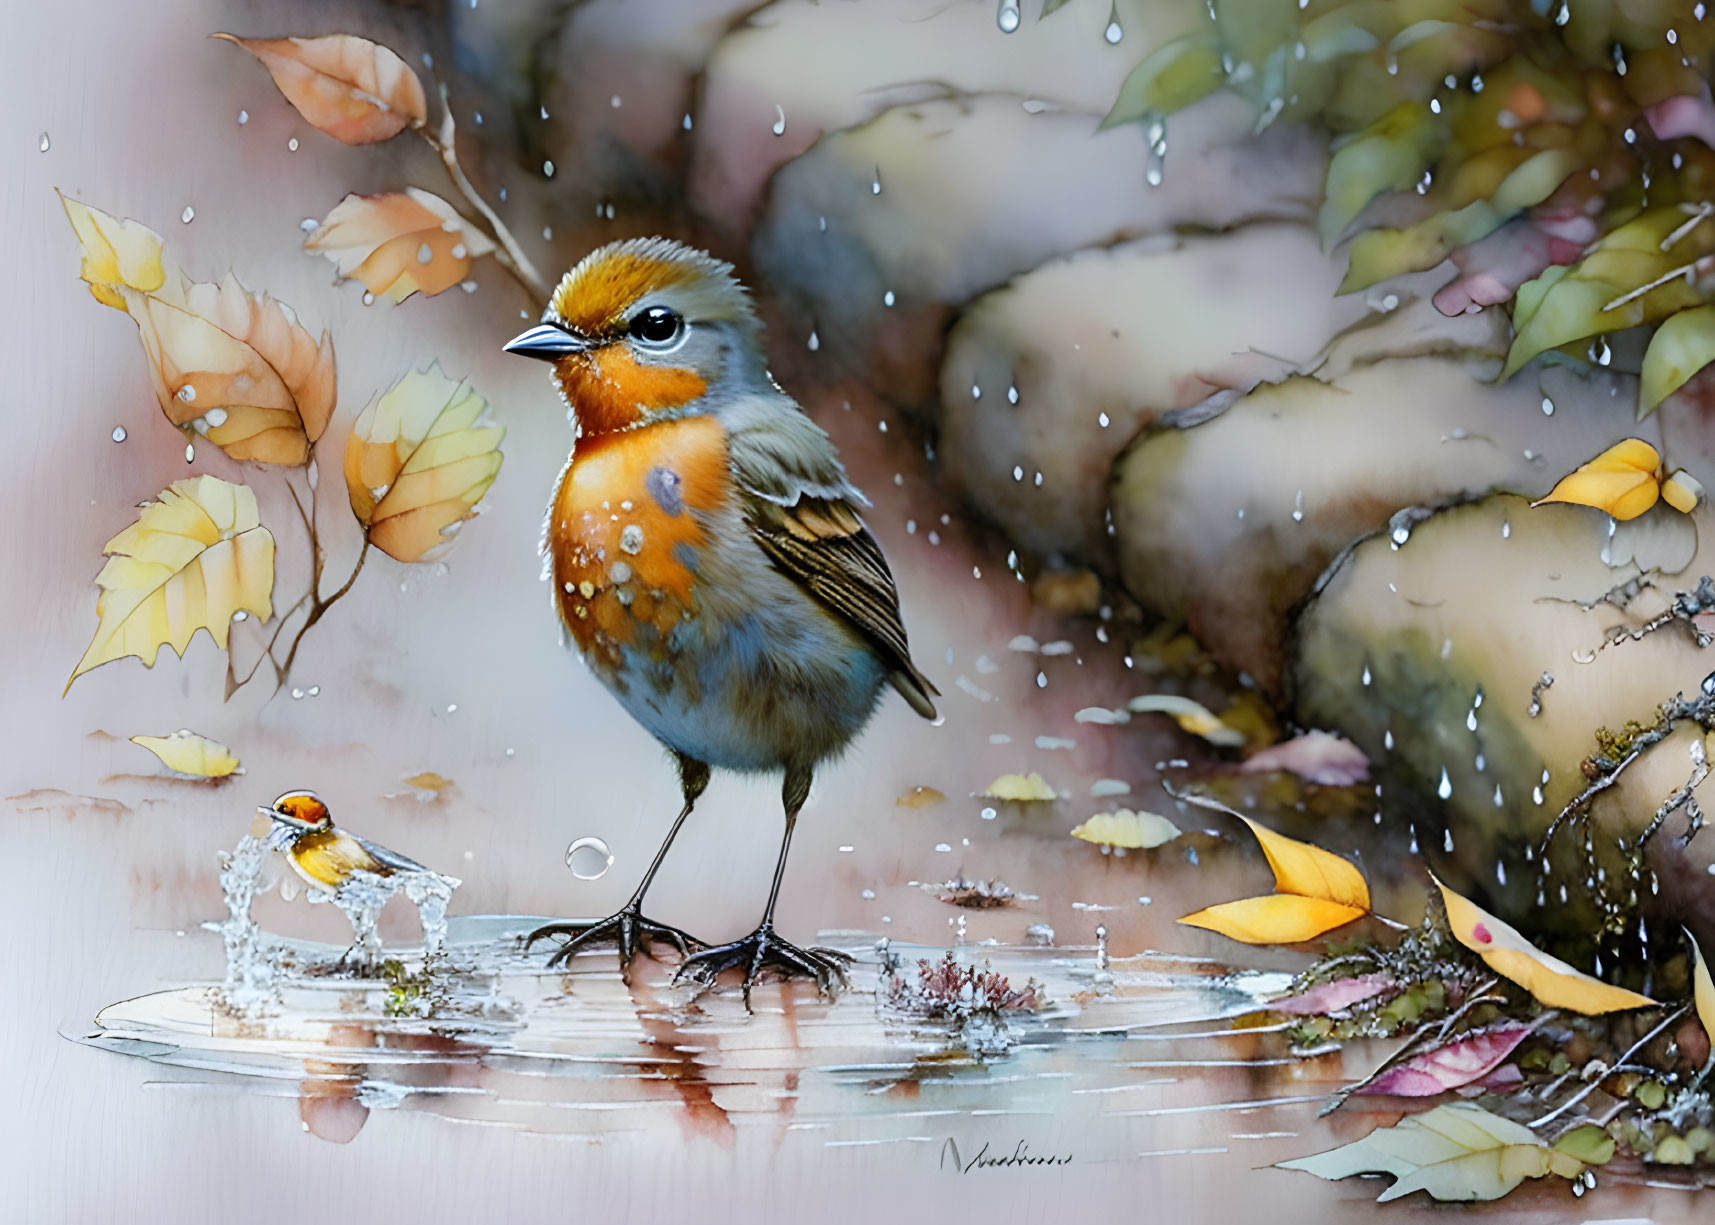 Stylized birds on watercolor background with autumn leaves and raindrops